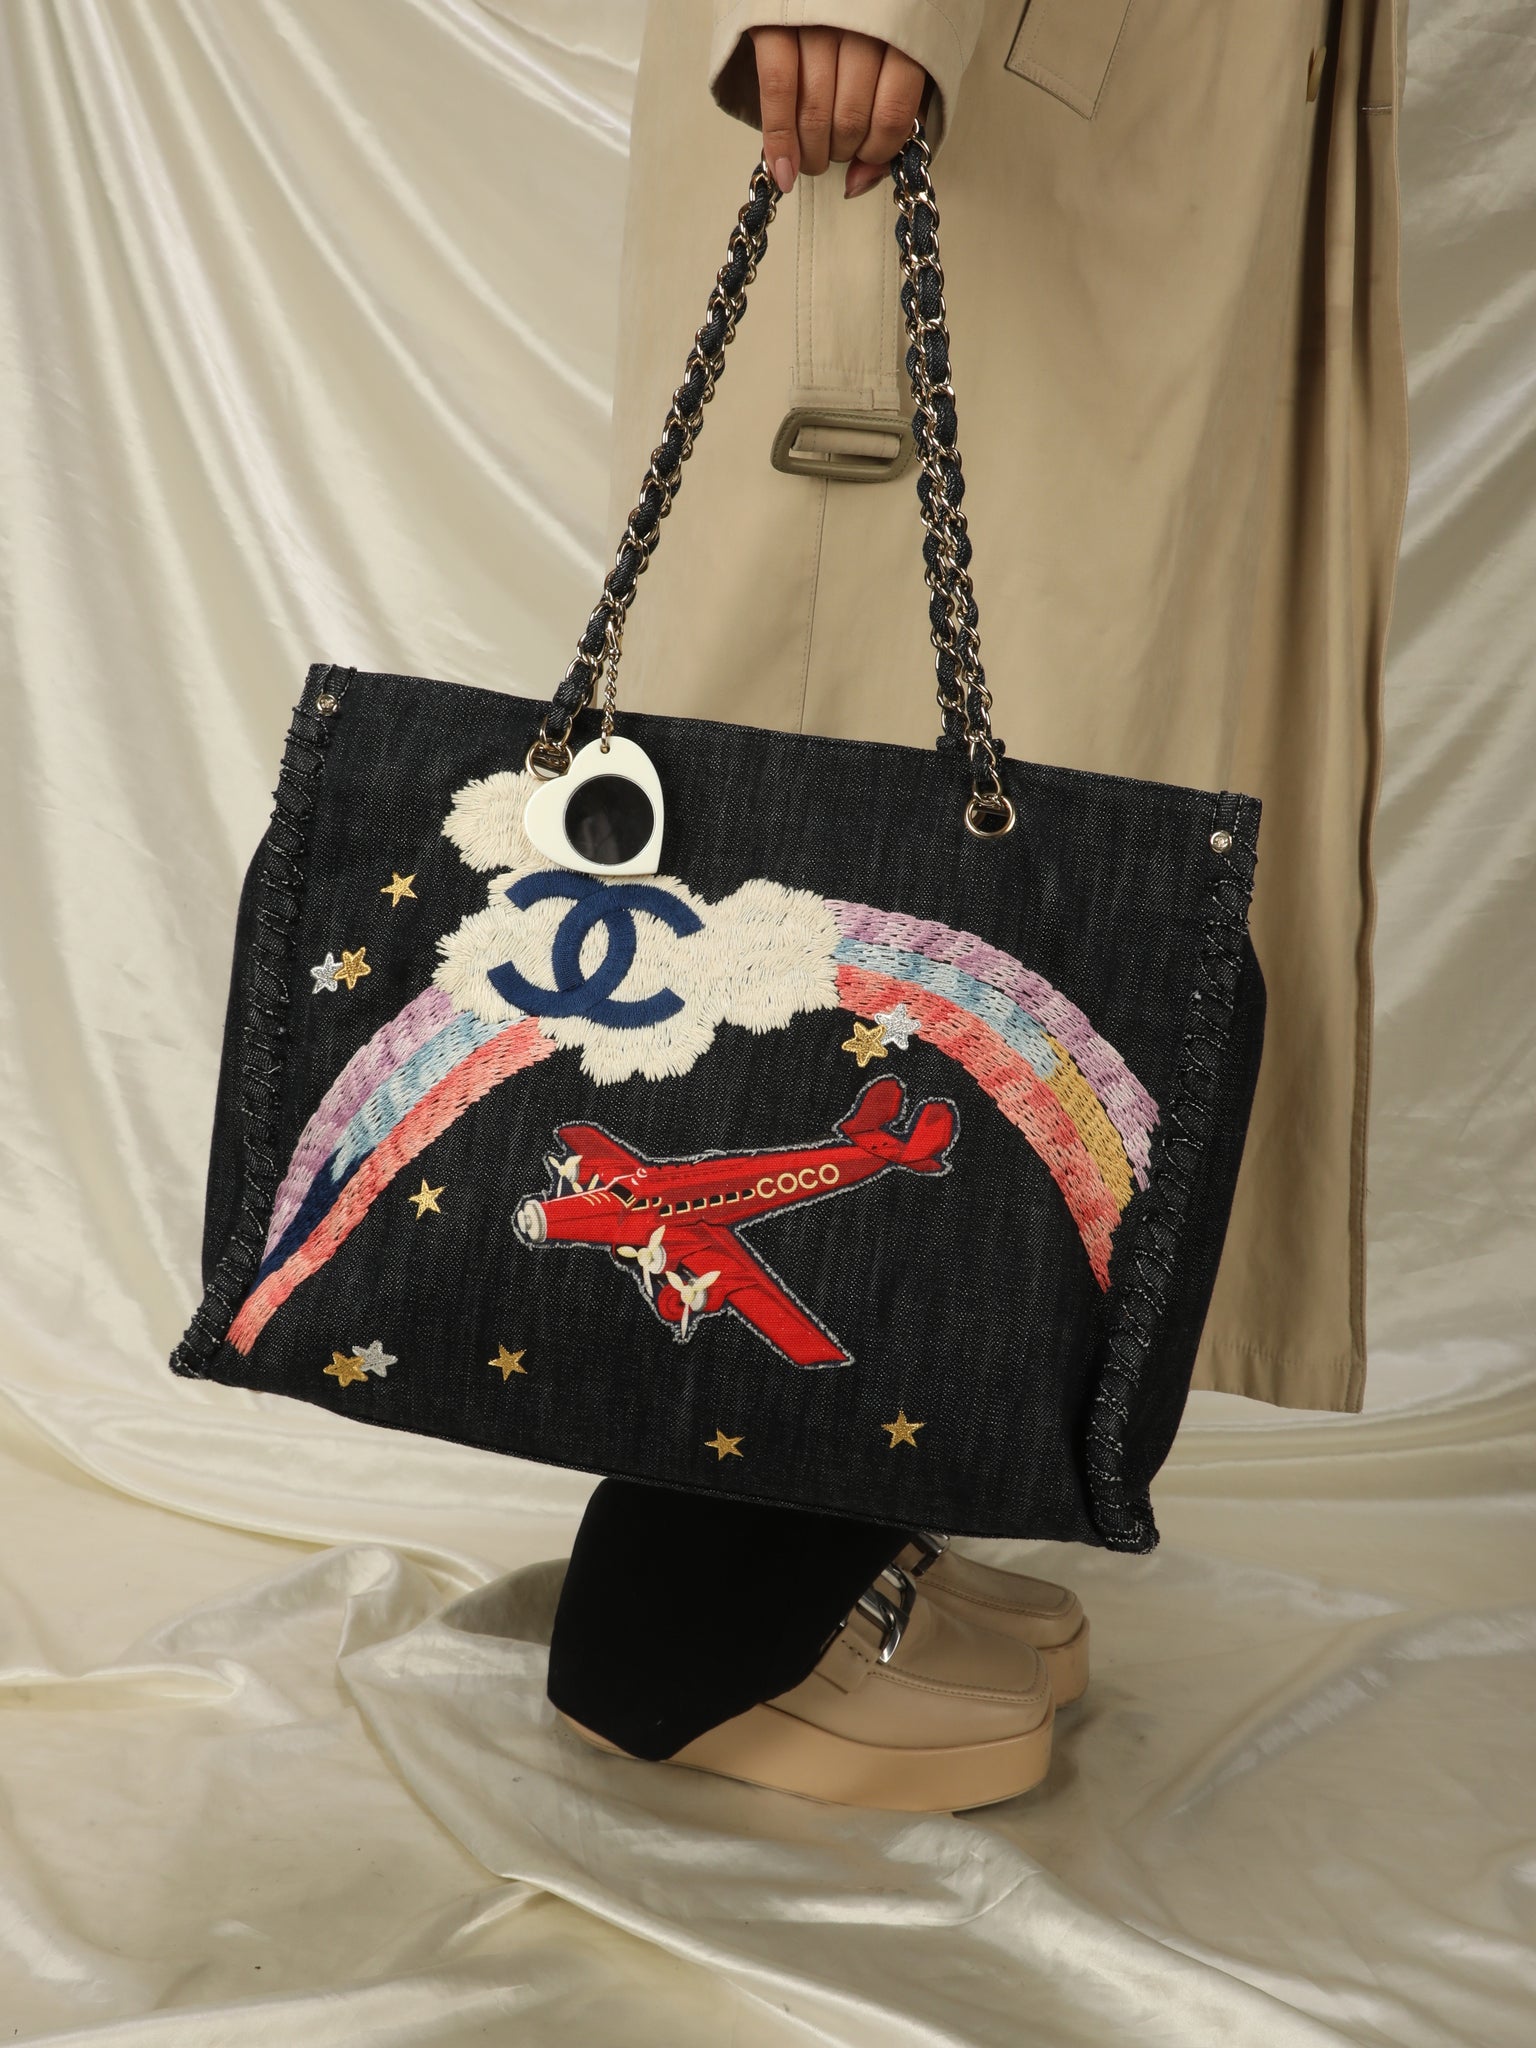 Extremely Rare Limited Edition Chanel Denim Embroidered Tote